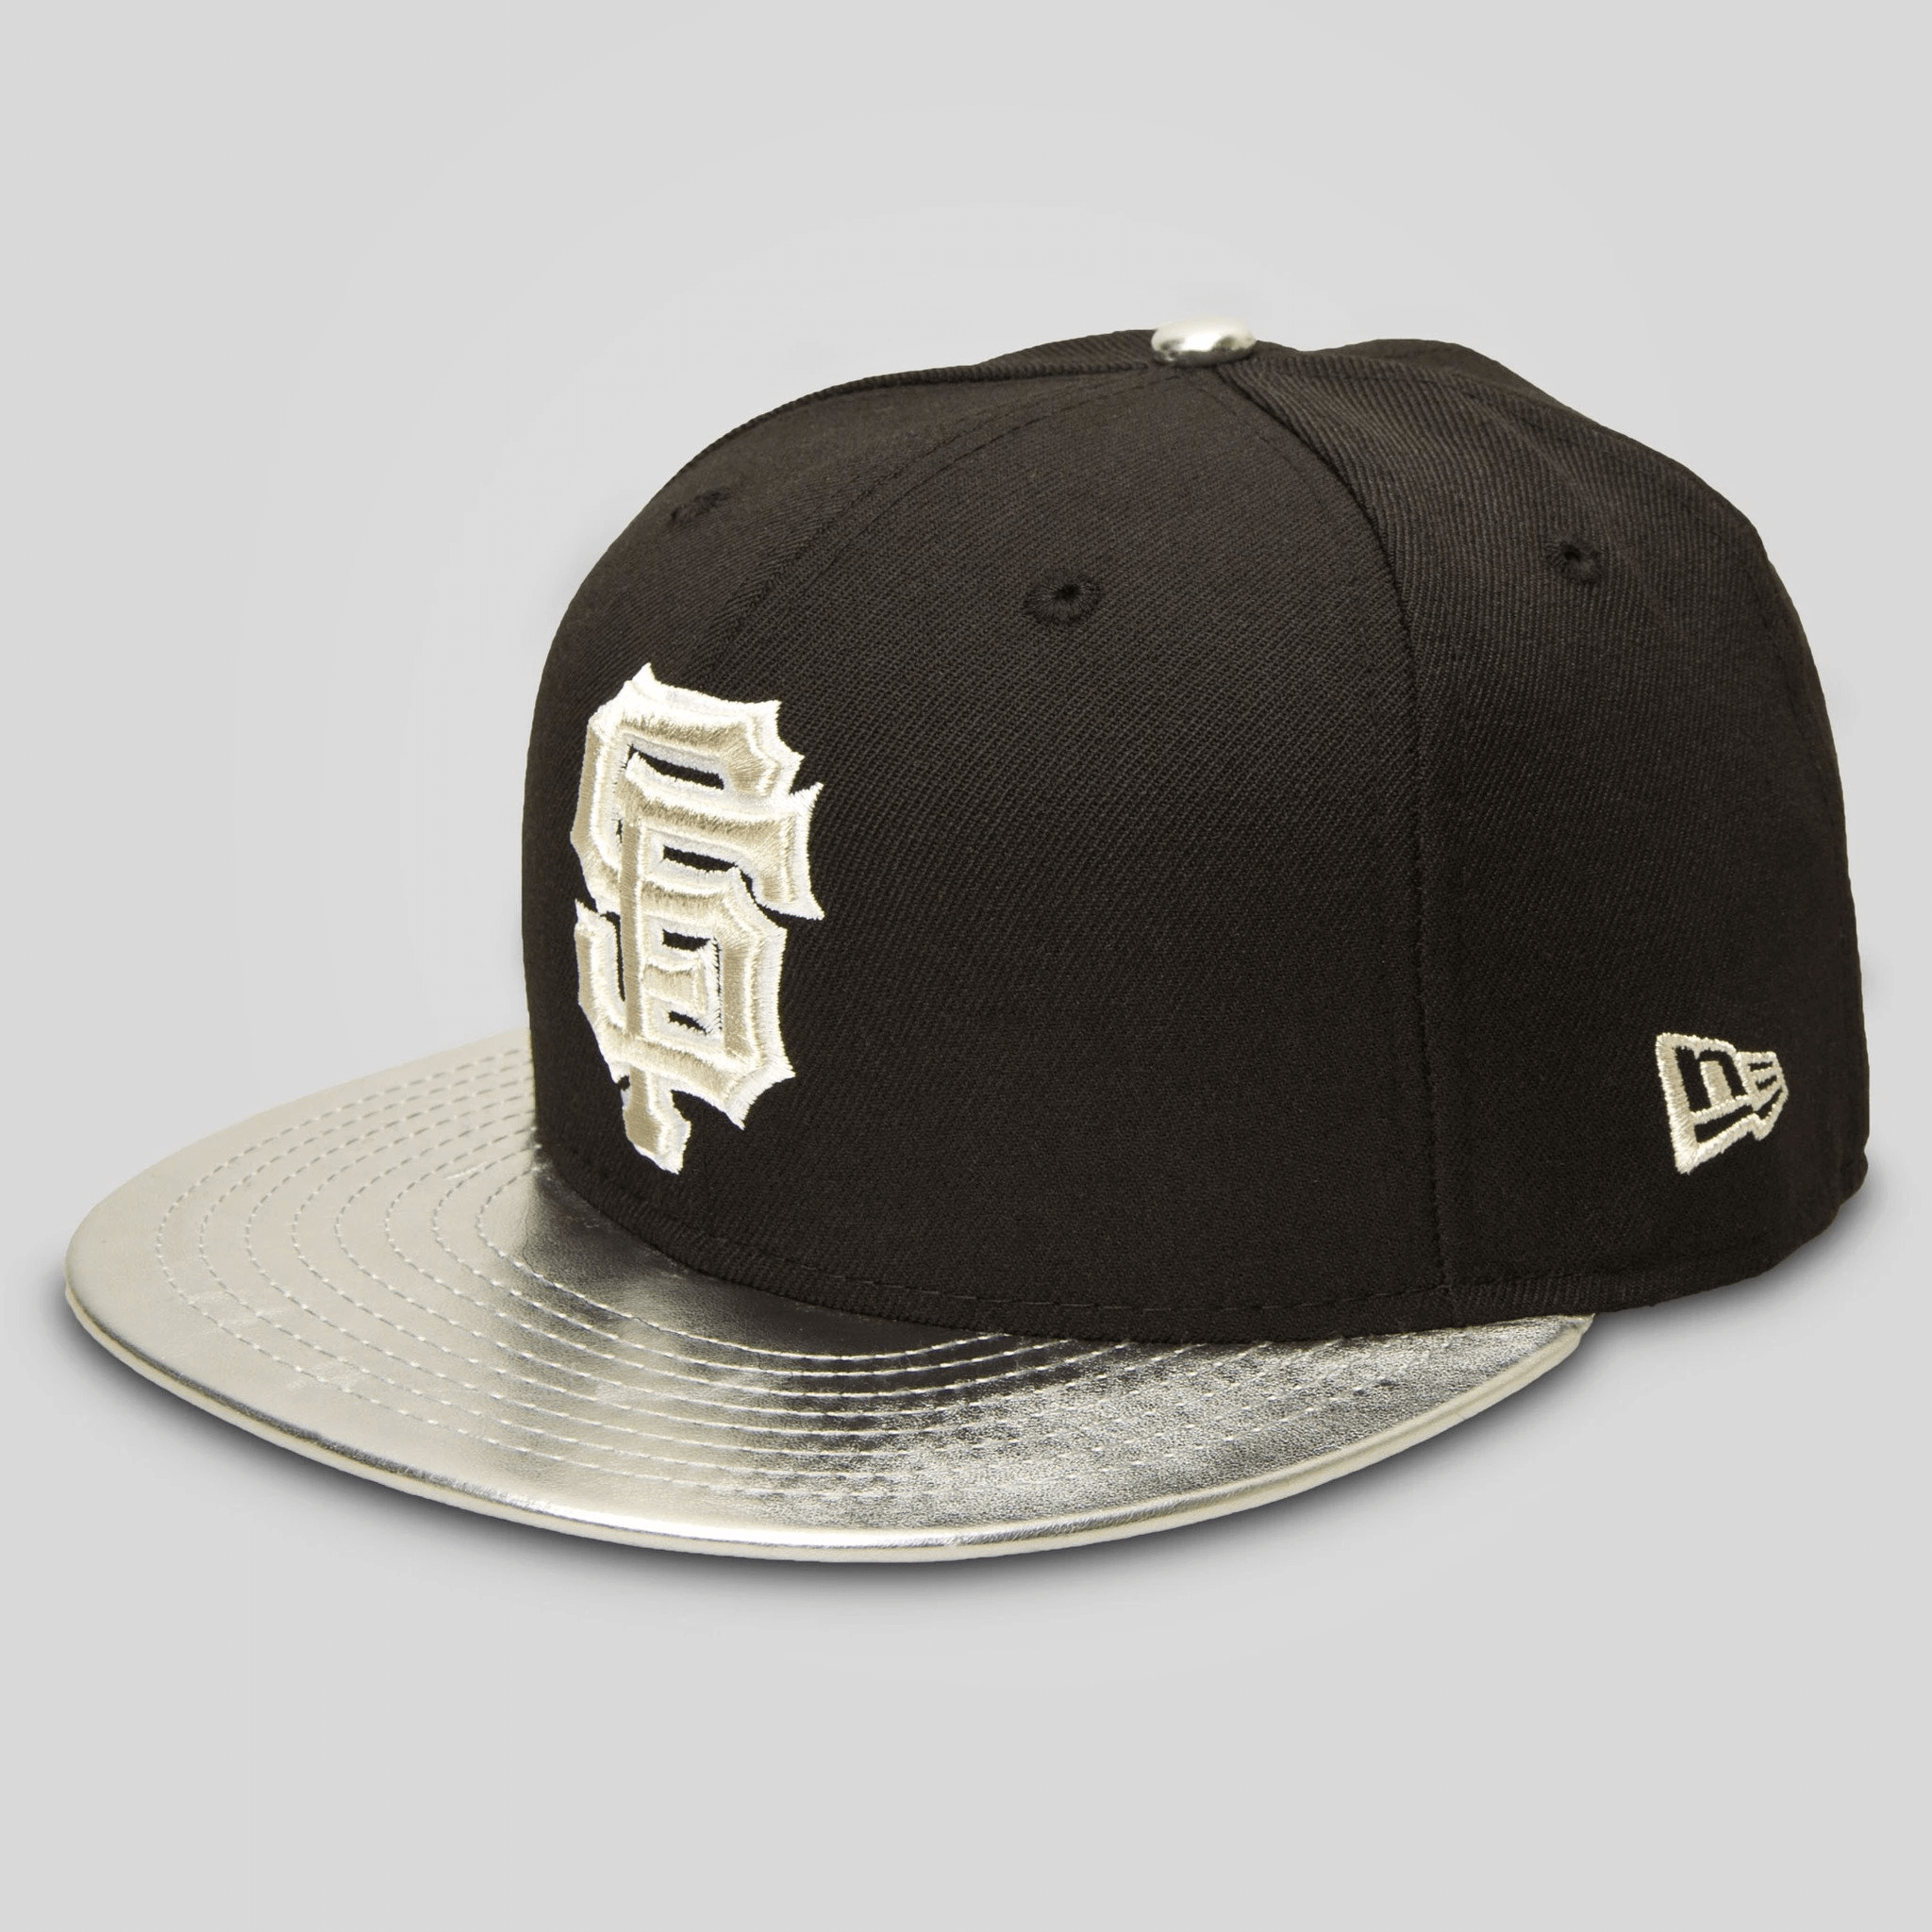 NEW ERA: BAGS AND ACCESSORIES, NEW ERA THE LEAGUE SAN FRANCISCO GIANTS